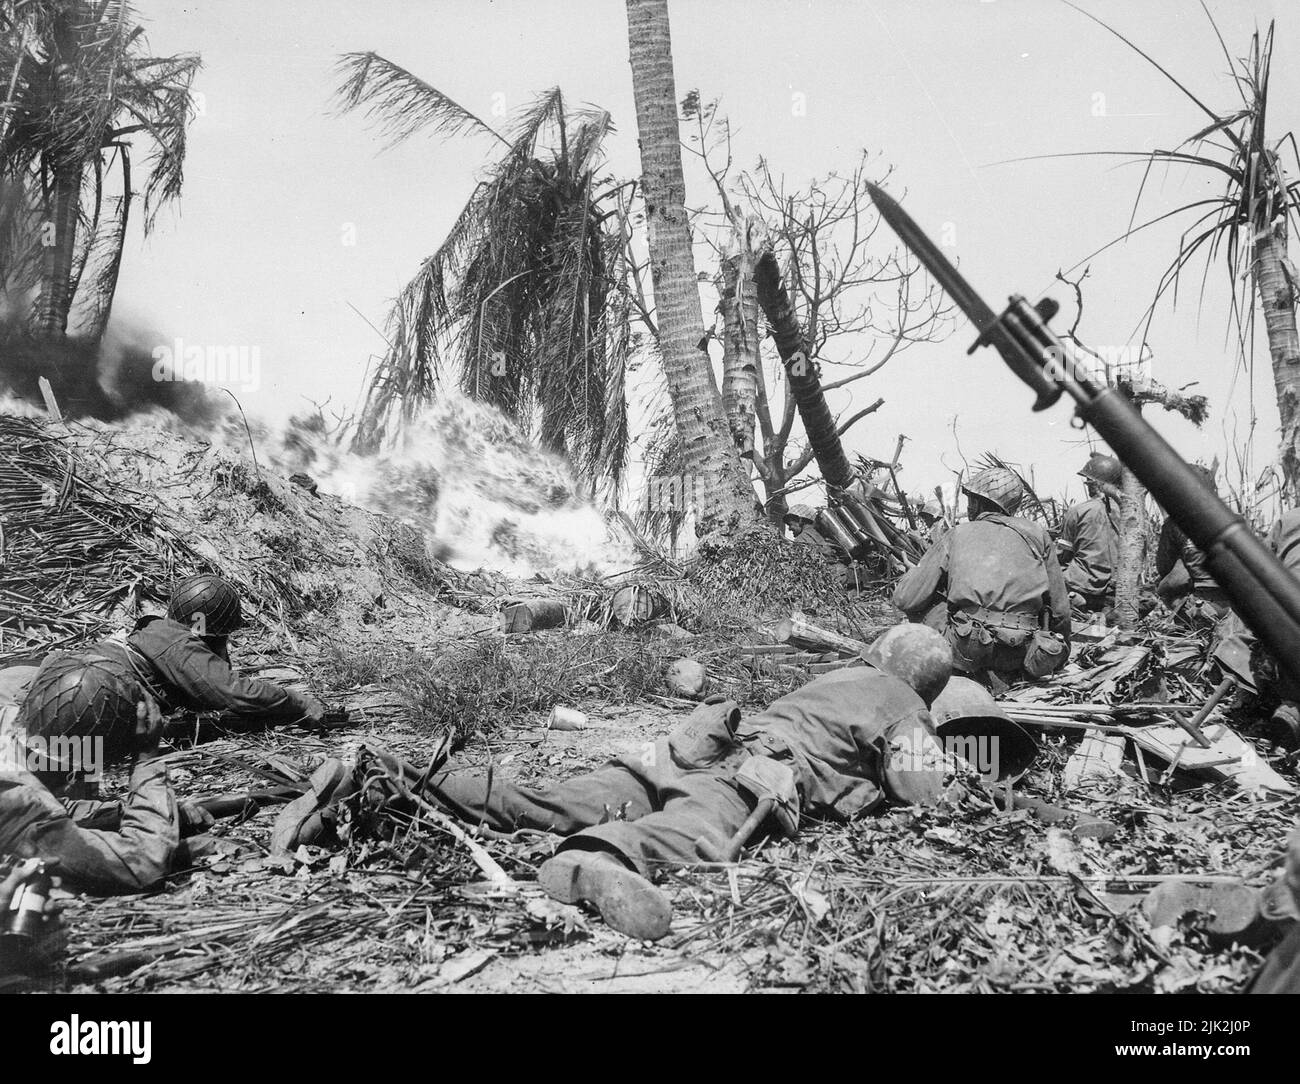 Men of the 7th Division using flame throwers on Japanese soldiers in a block house on Kwajalein Island, while others wait with rifles ready in case other Japanese come out. Stock Photo